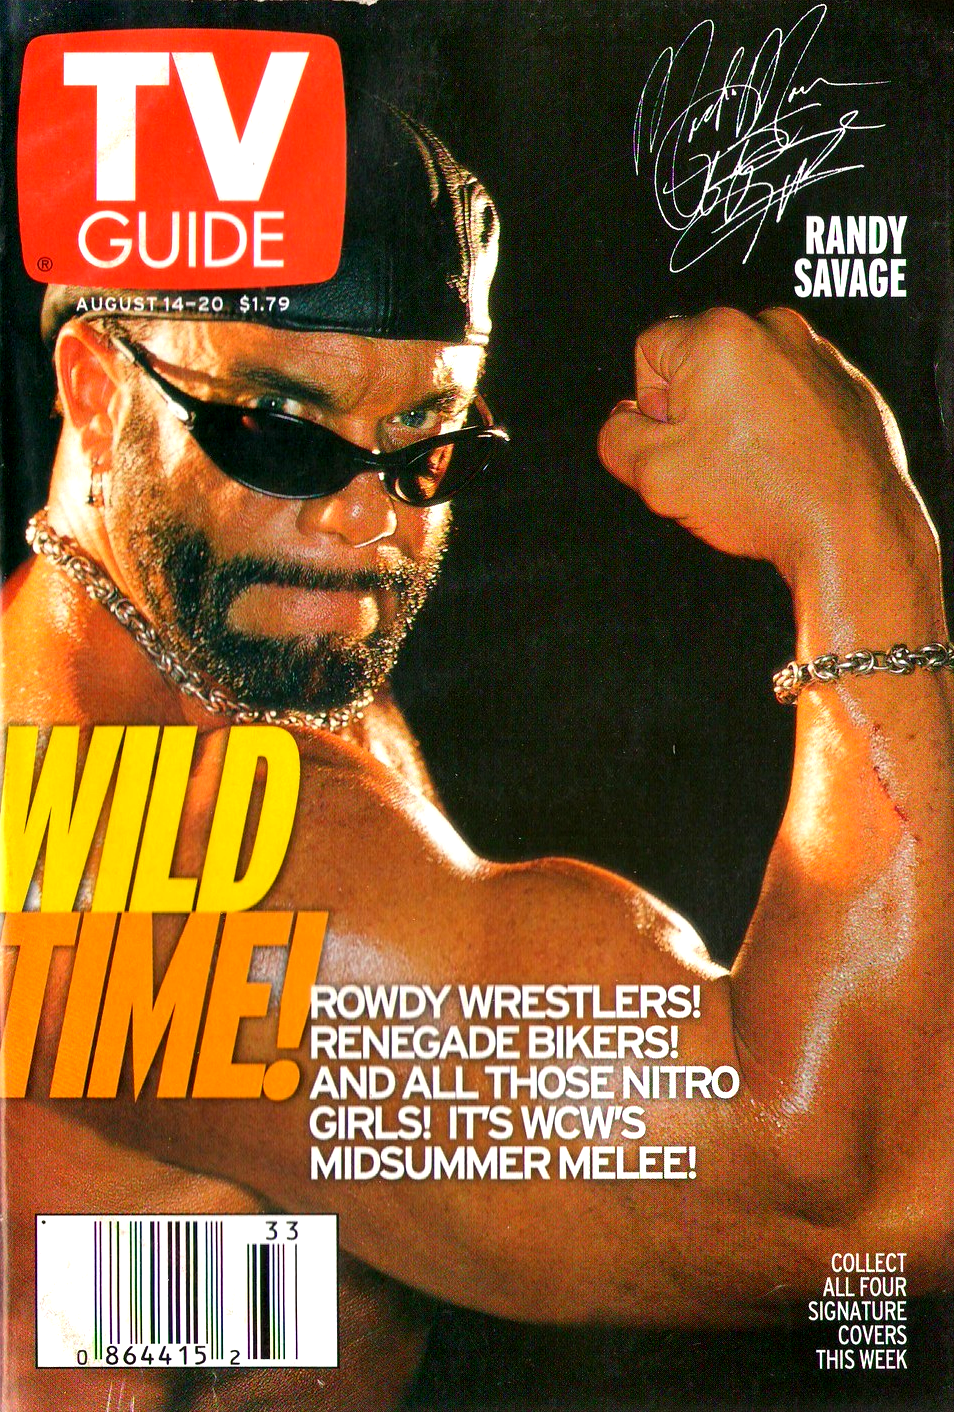 TV Guide August 14, 1999 Randy Savage 1 of 4